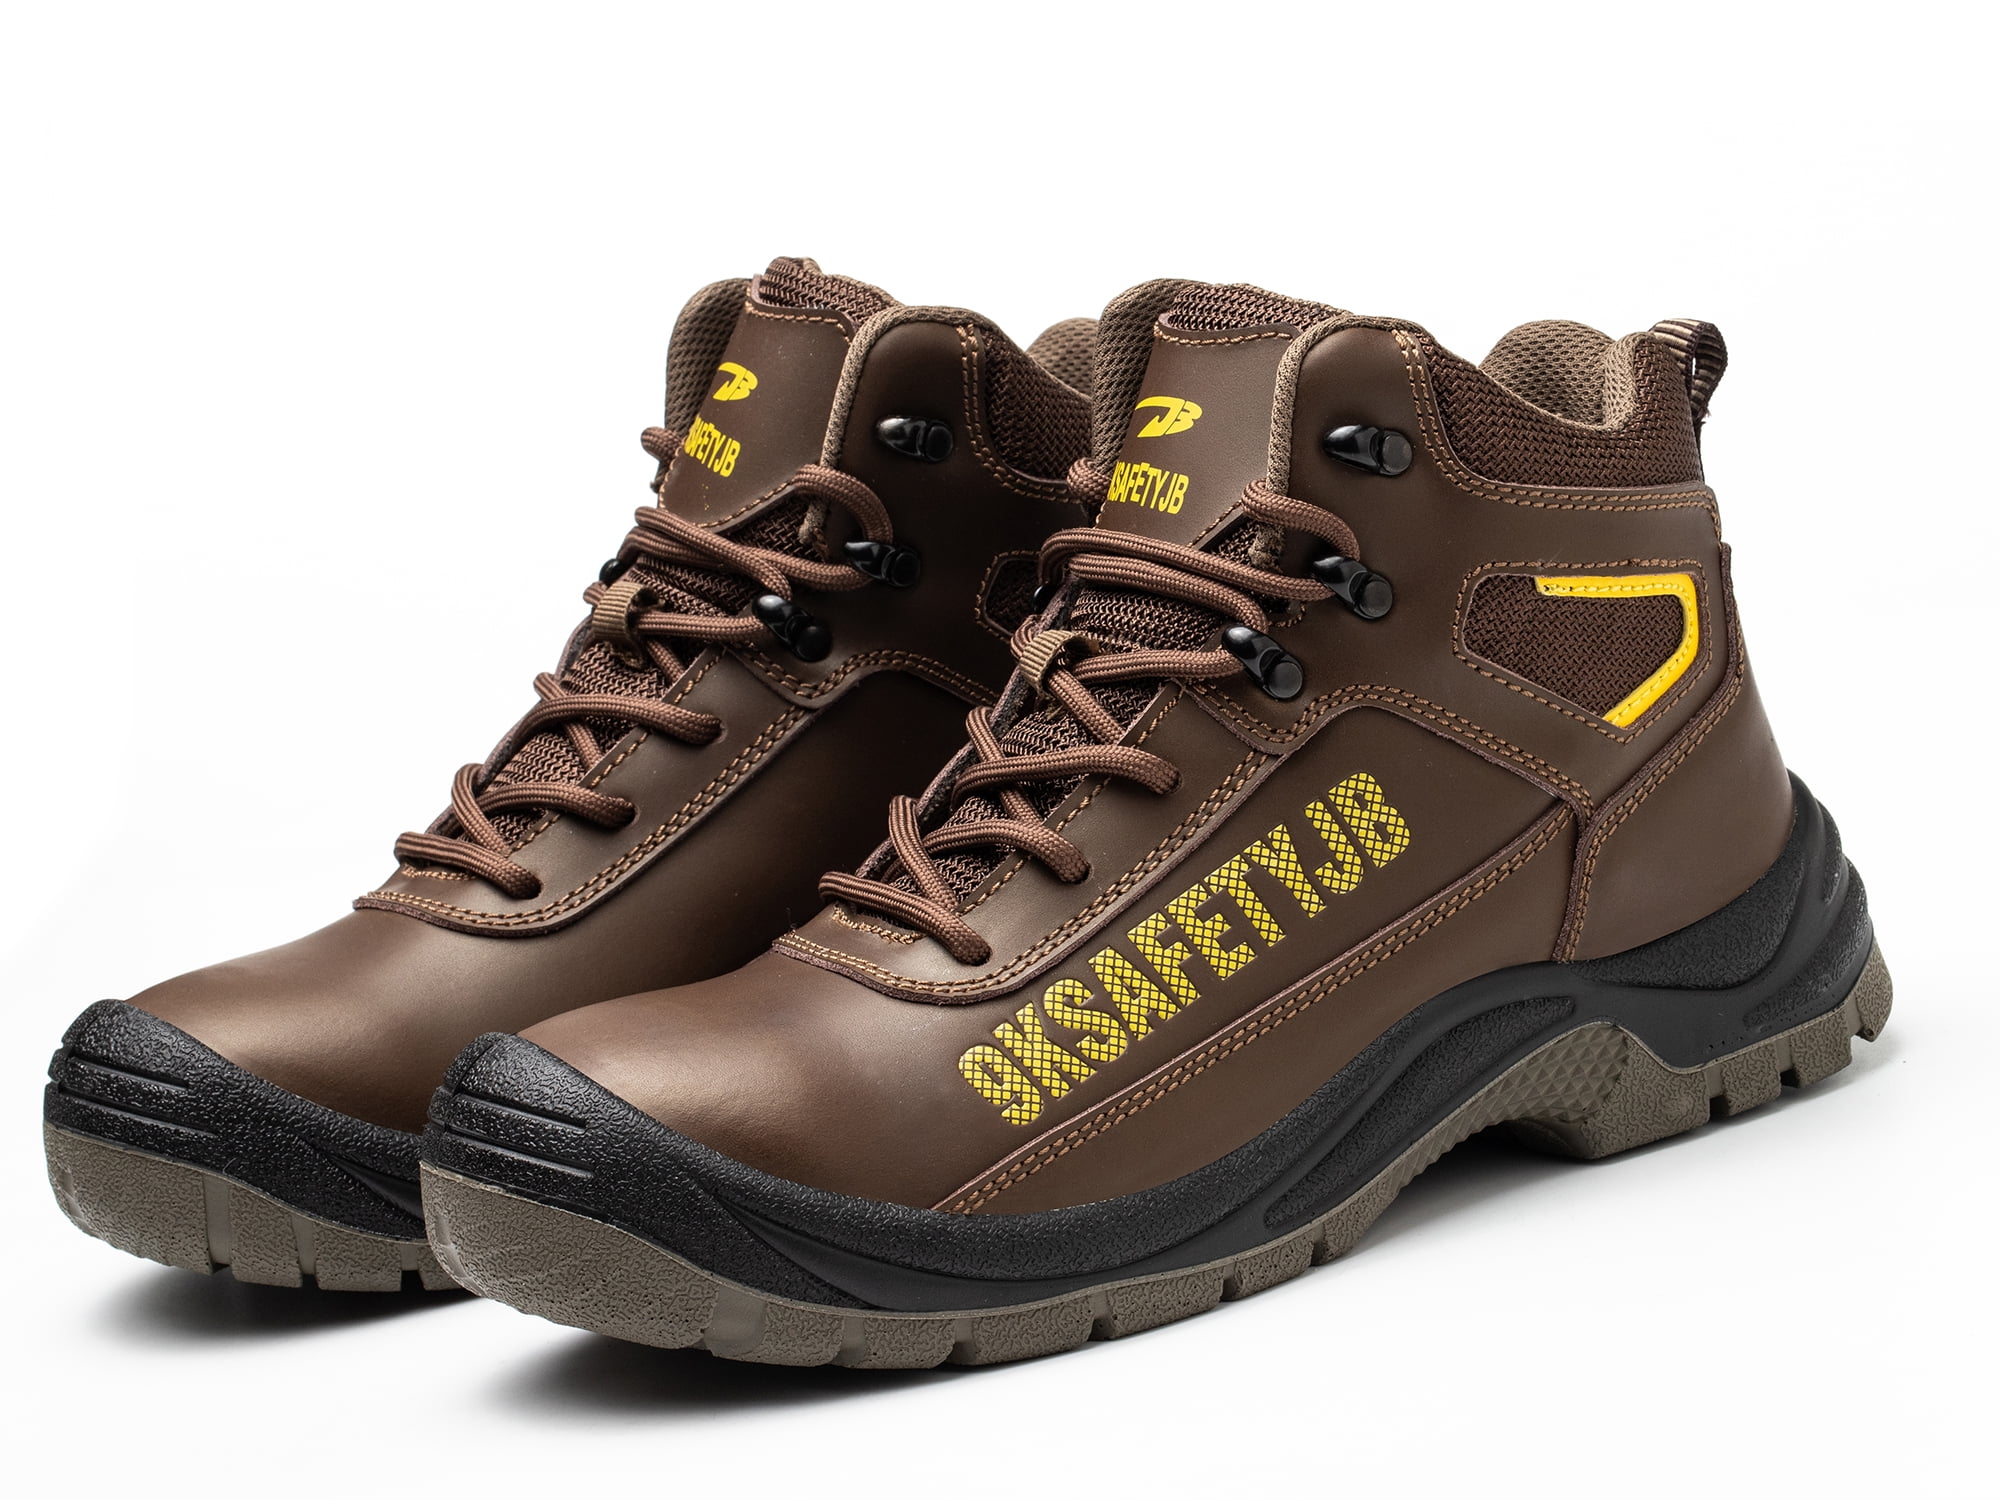 Men's Leather Work Boots Steel Toe Safety Shoes Slip Construction Indestructible 